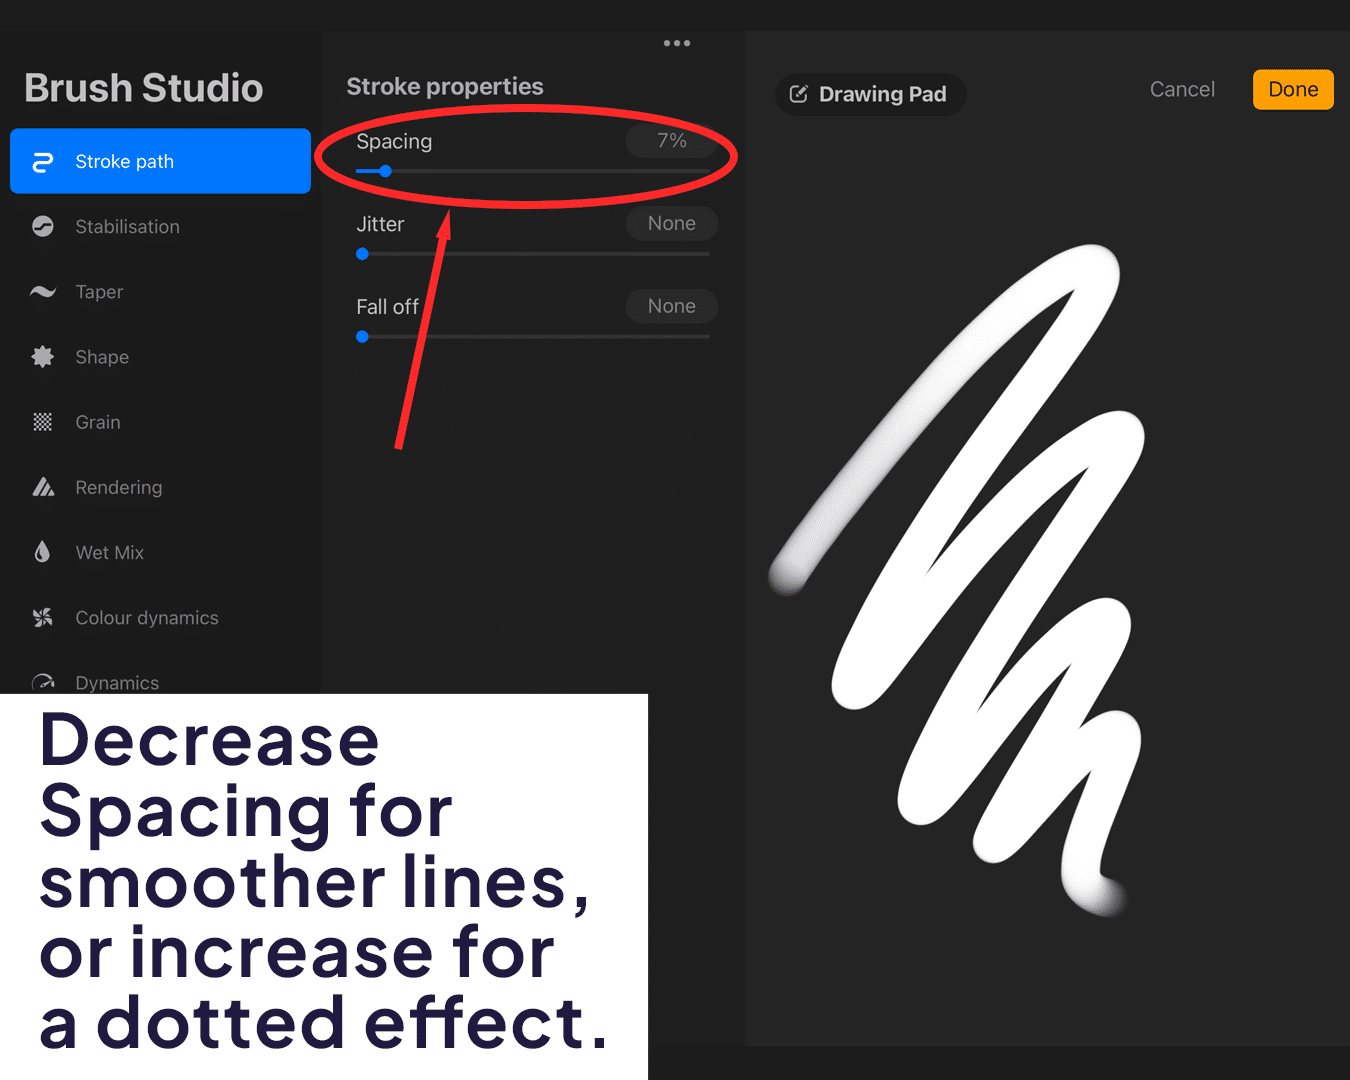 How To Make Inking Brush In Procreate?